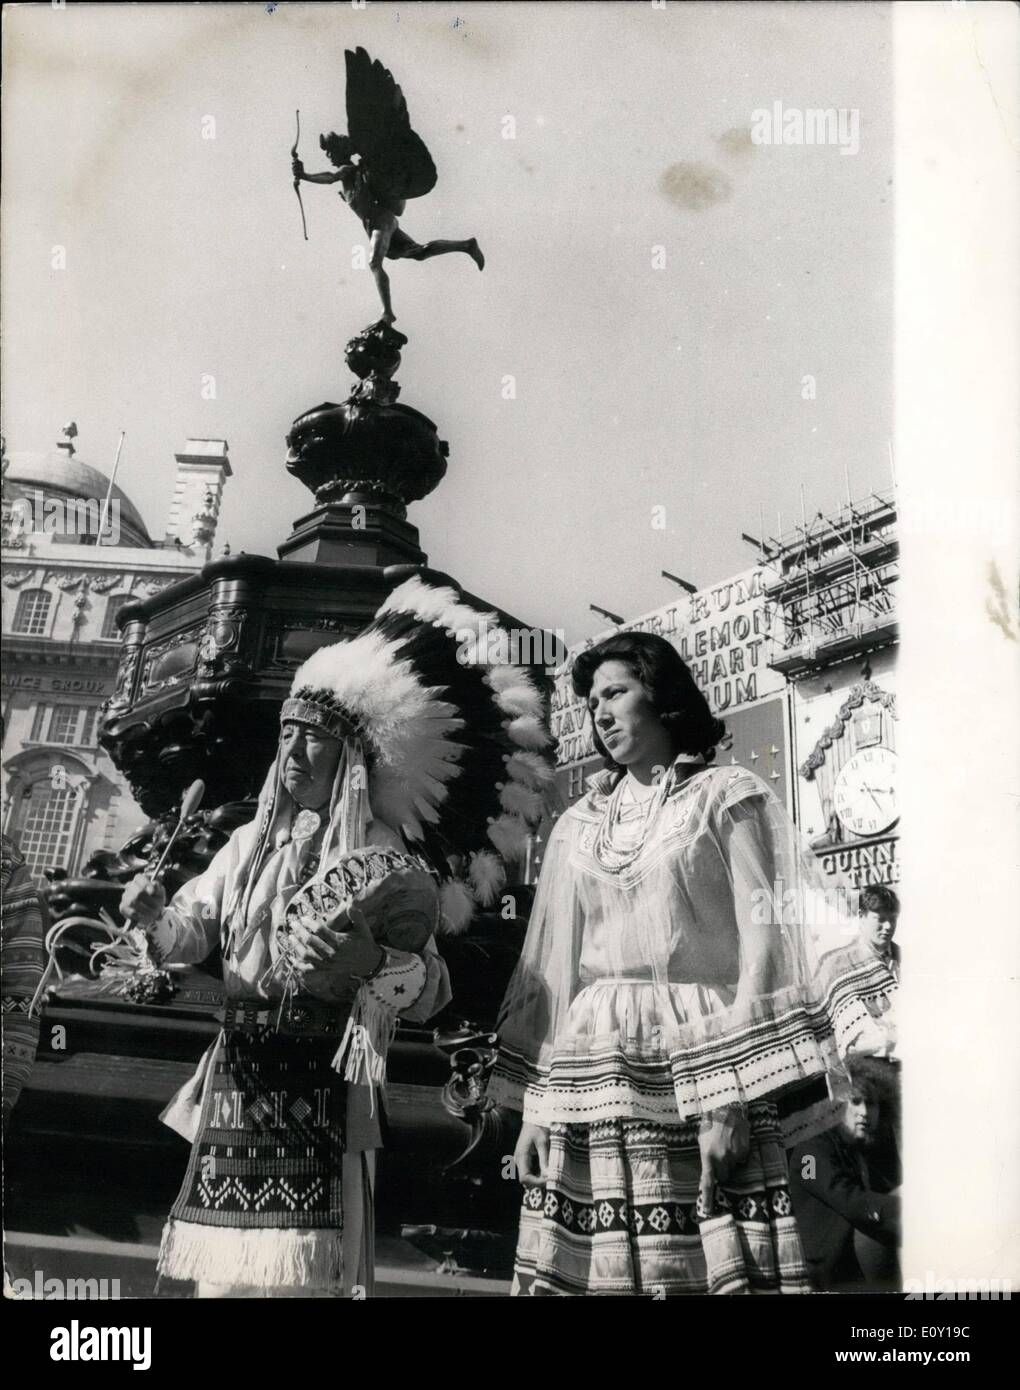 Mar. 03, 1968 - Party of Indians in London on Goodwill visit: Three members of the party of six Indians who are here for three weeks on a goodwill visit sponsored by the U.S.Department of Commerce, were out in London today - in their national costume. The three are Chief Wolf Robe Hunt, full chief of the Acoma Pueblo Indian Tribe. (From Tulsa, Oklahoma); Chief Joe Dan Osceola, leader of the Seminoles. Great-great grandson of Chief Osceola, famous war chief of the Seminoles when they fought the United States Stock Photo